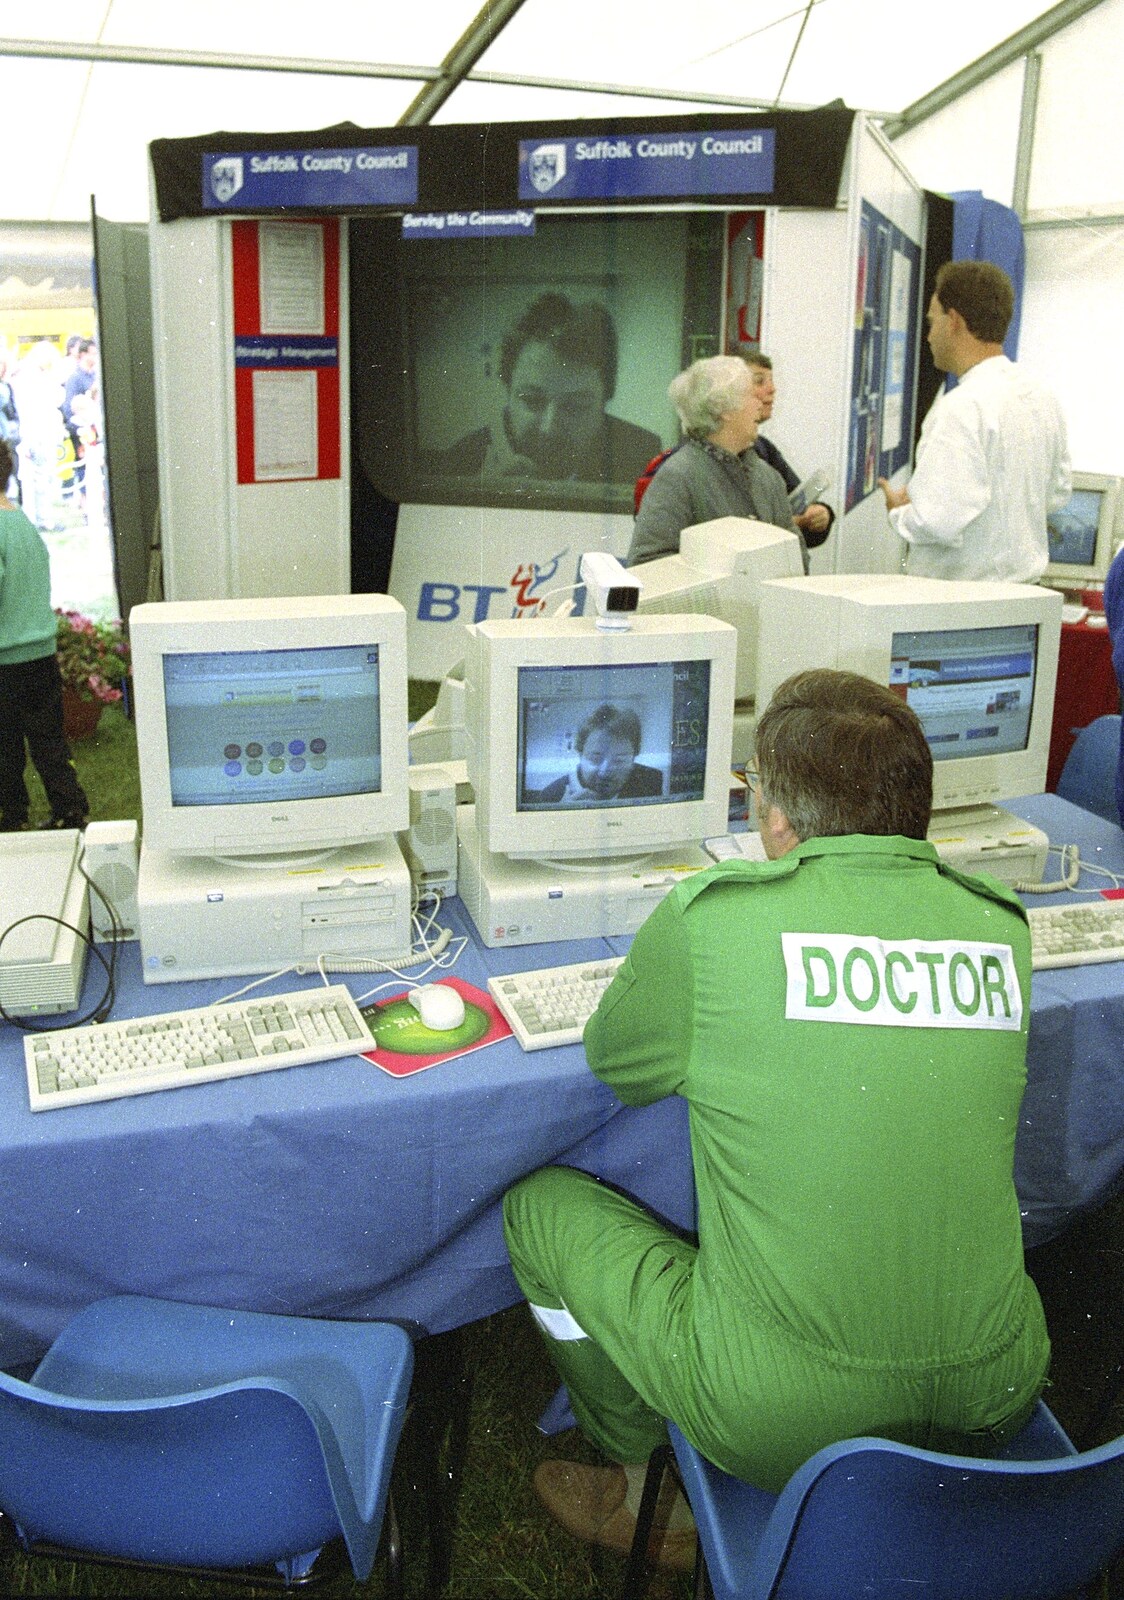 An doctor video-conferences with Chris Mole from CISU do 'Internet-in-a-field', Suffolk Show, Ipswich - May 21st 1997